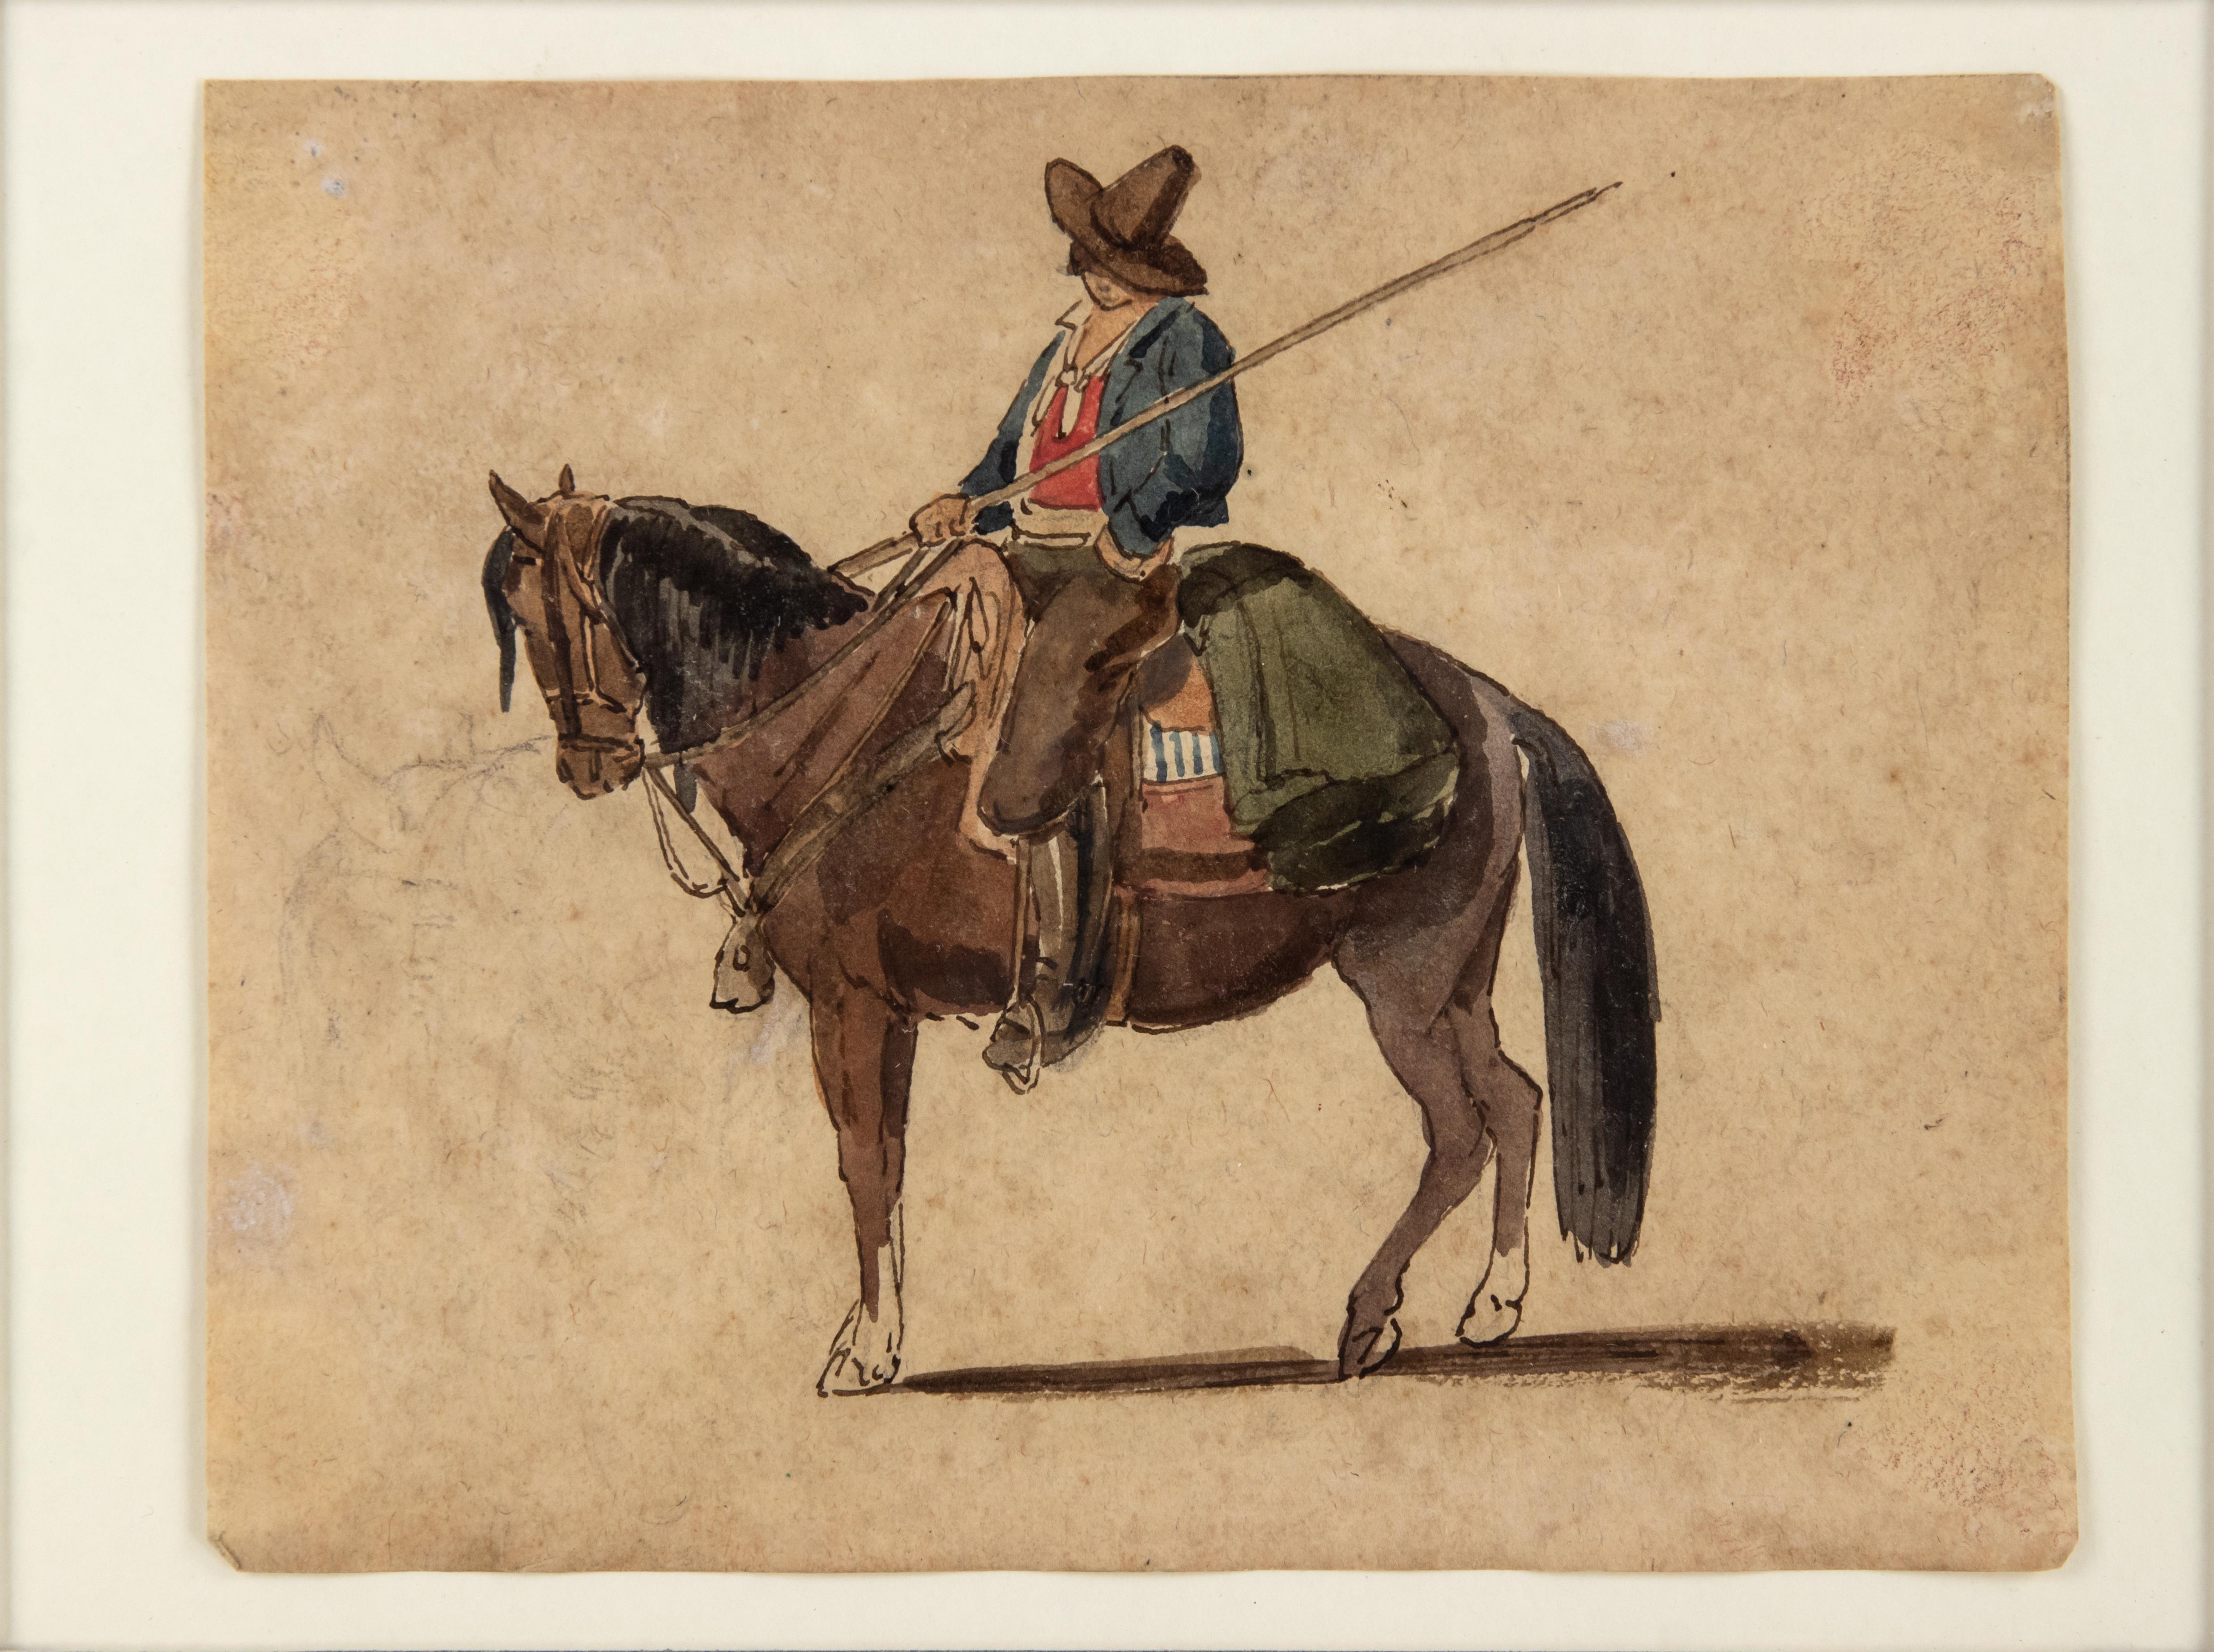 Charles Coleman Figurative Art - A Cowboy on the Horse - nk and Watercolor by C. Coleman - Late 1800